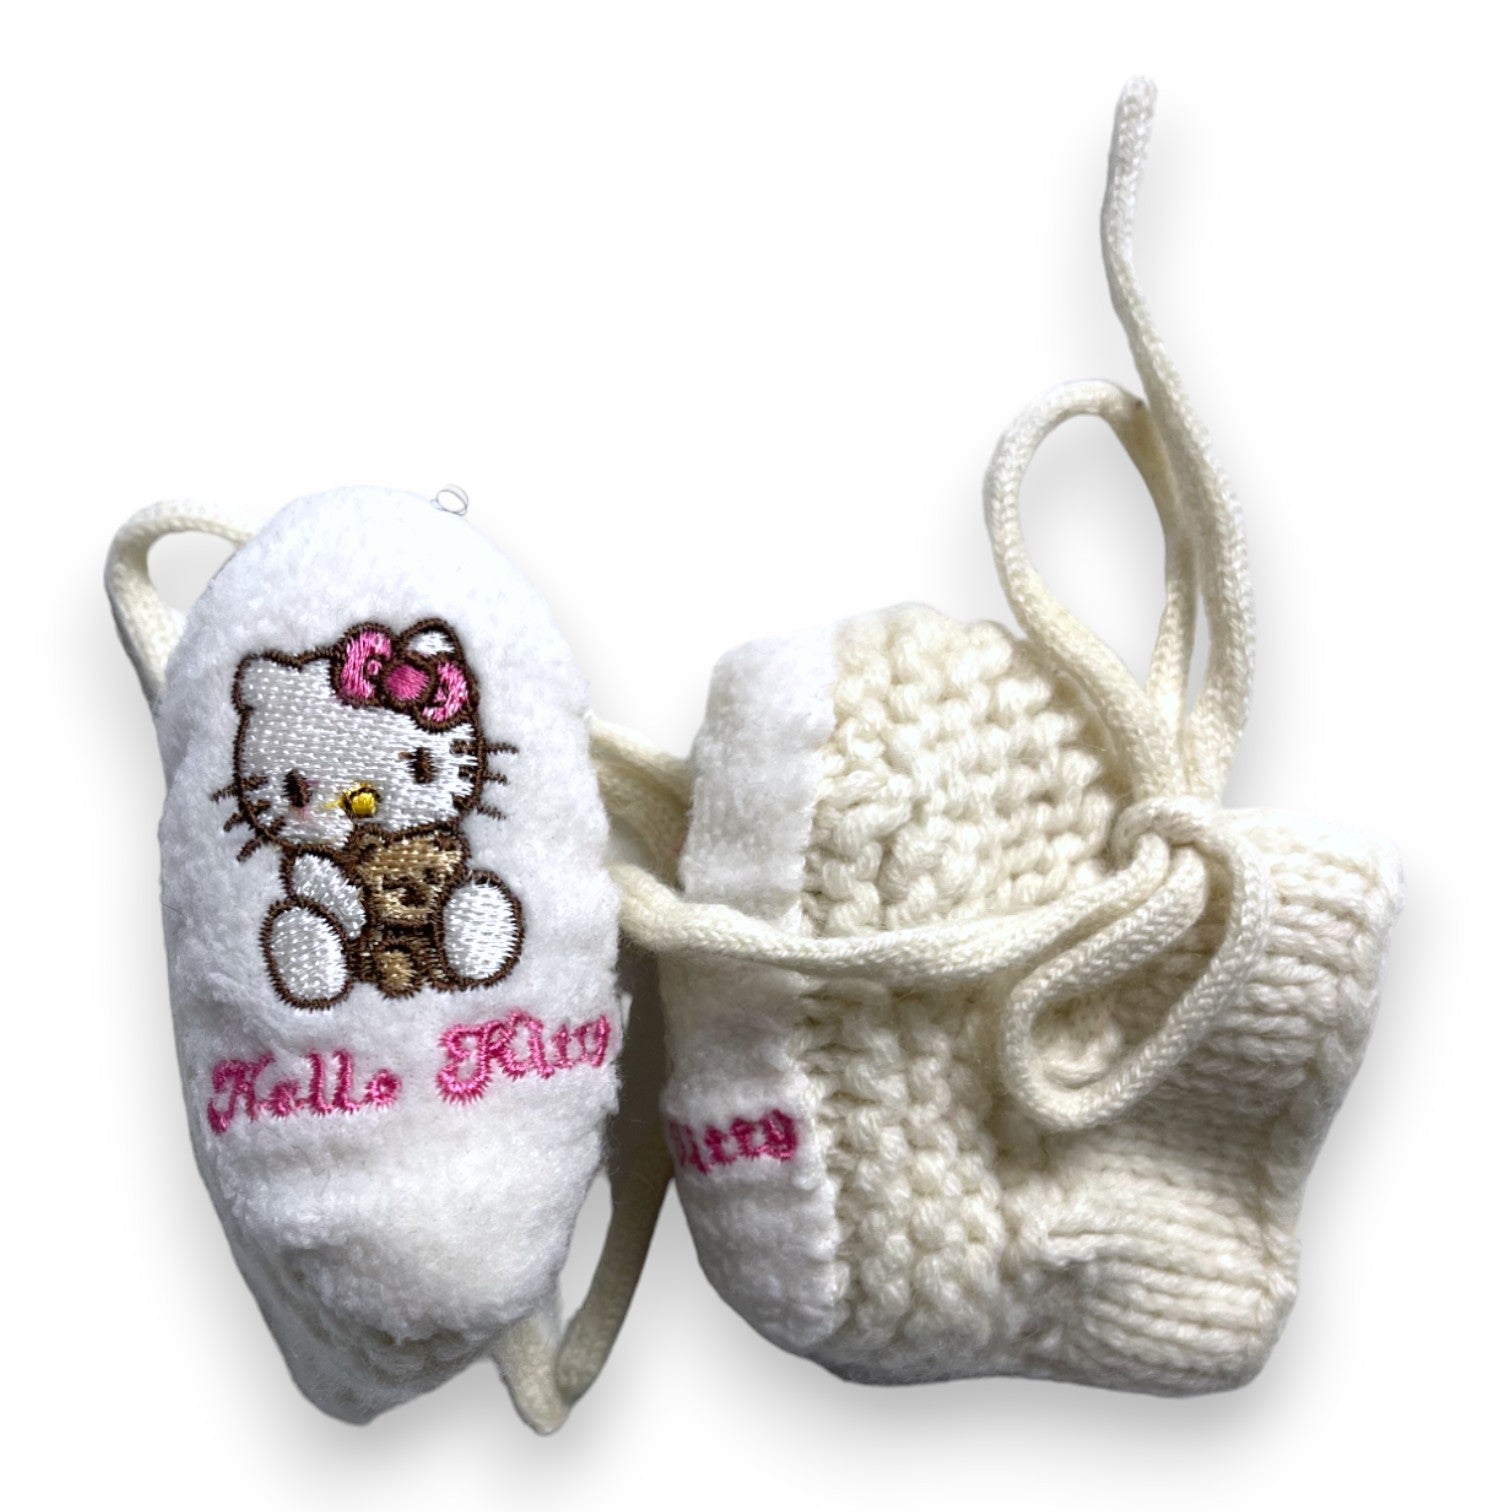 VICTORIA COUTURE - Chaussons écrus en cachemire Hello Kitty - Taille Naissance